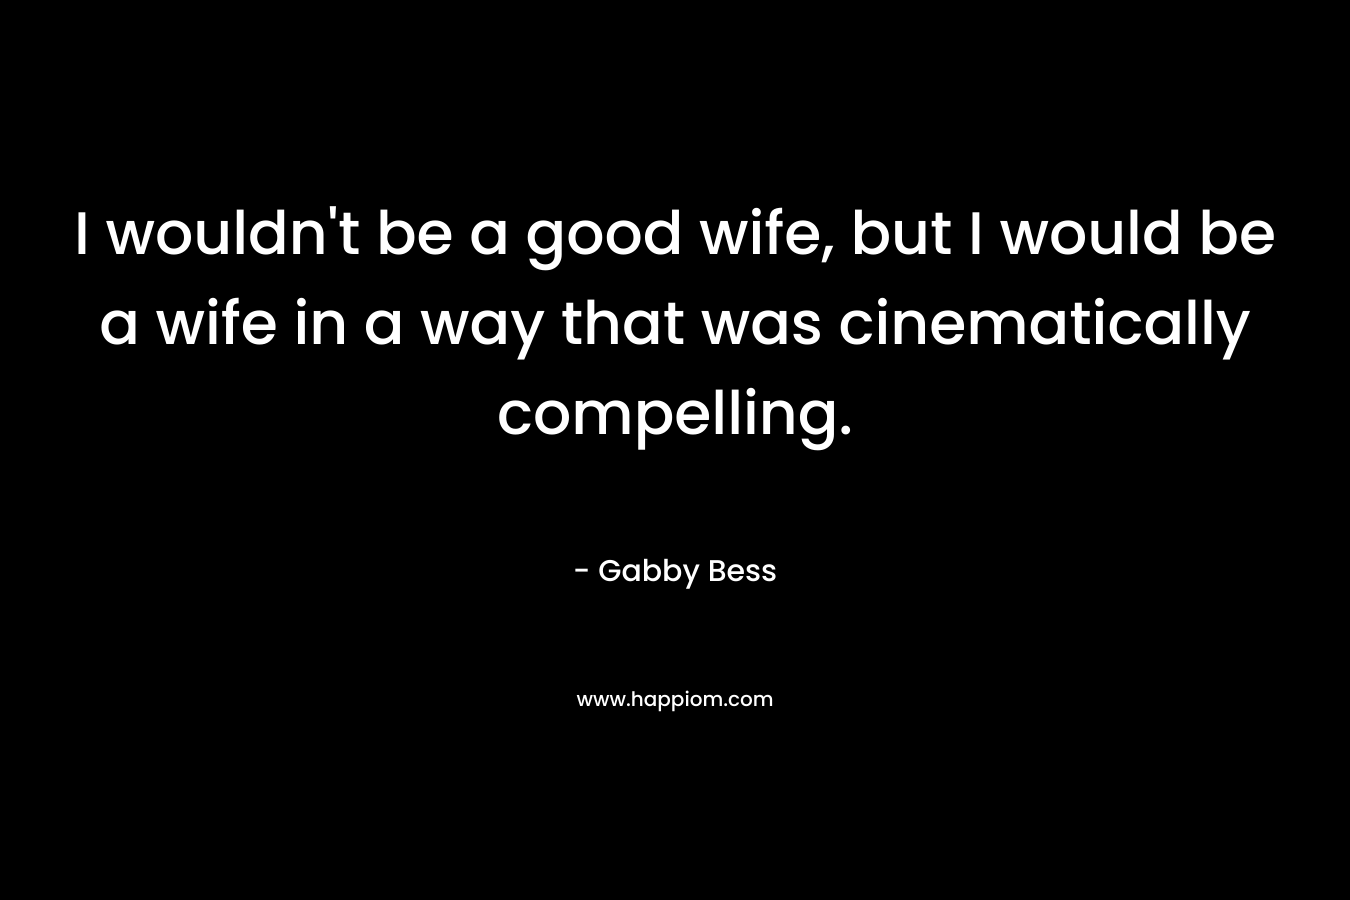 I wouldn’t be a good wife, but I would be a wife in a way that was cinematically compelling. – Gabby Bess